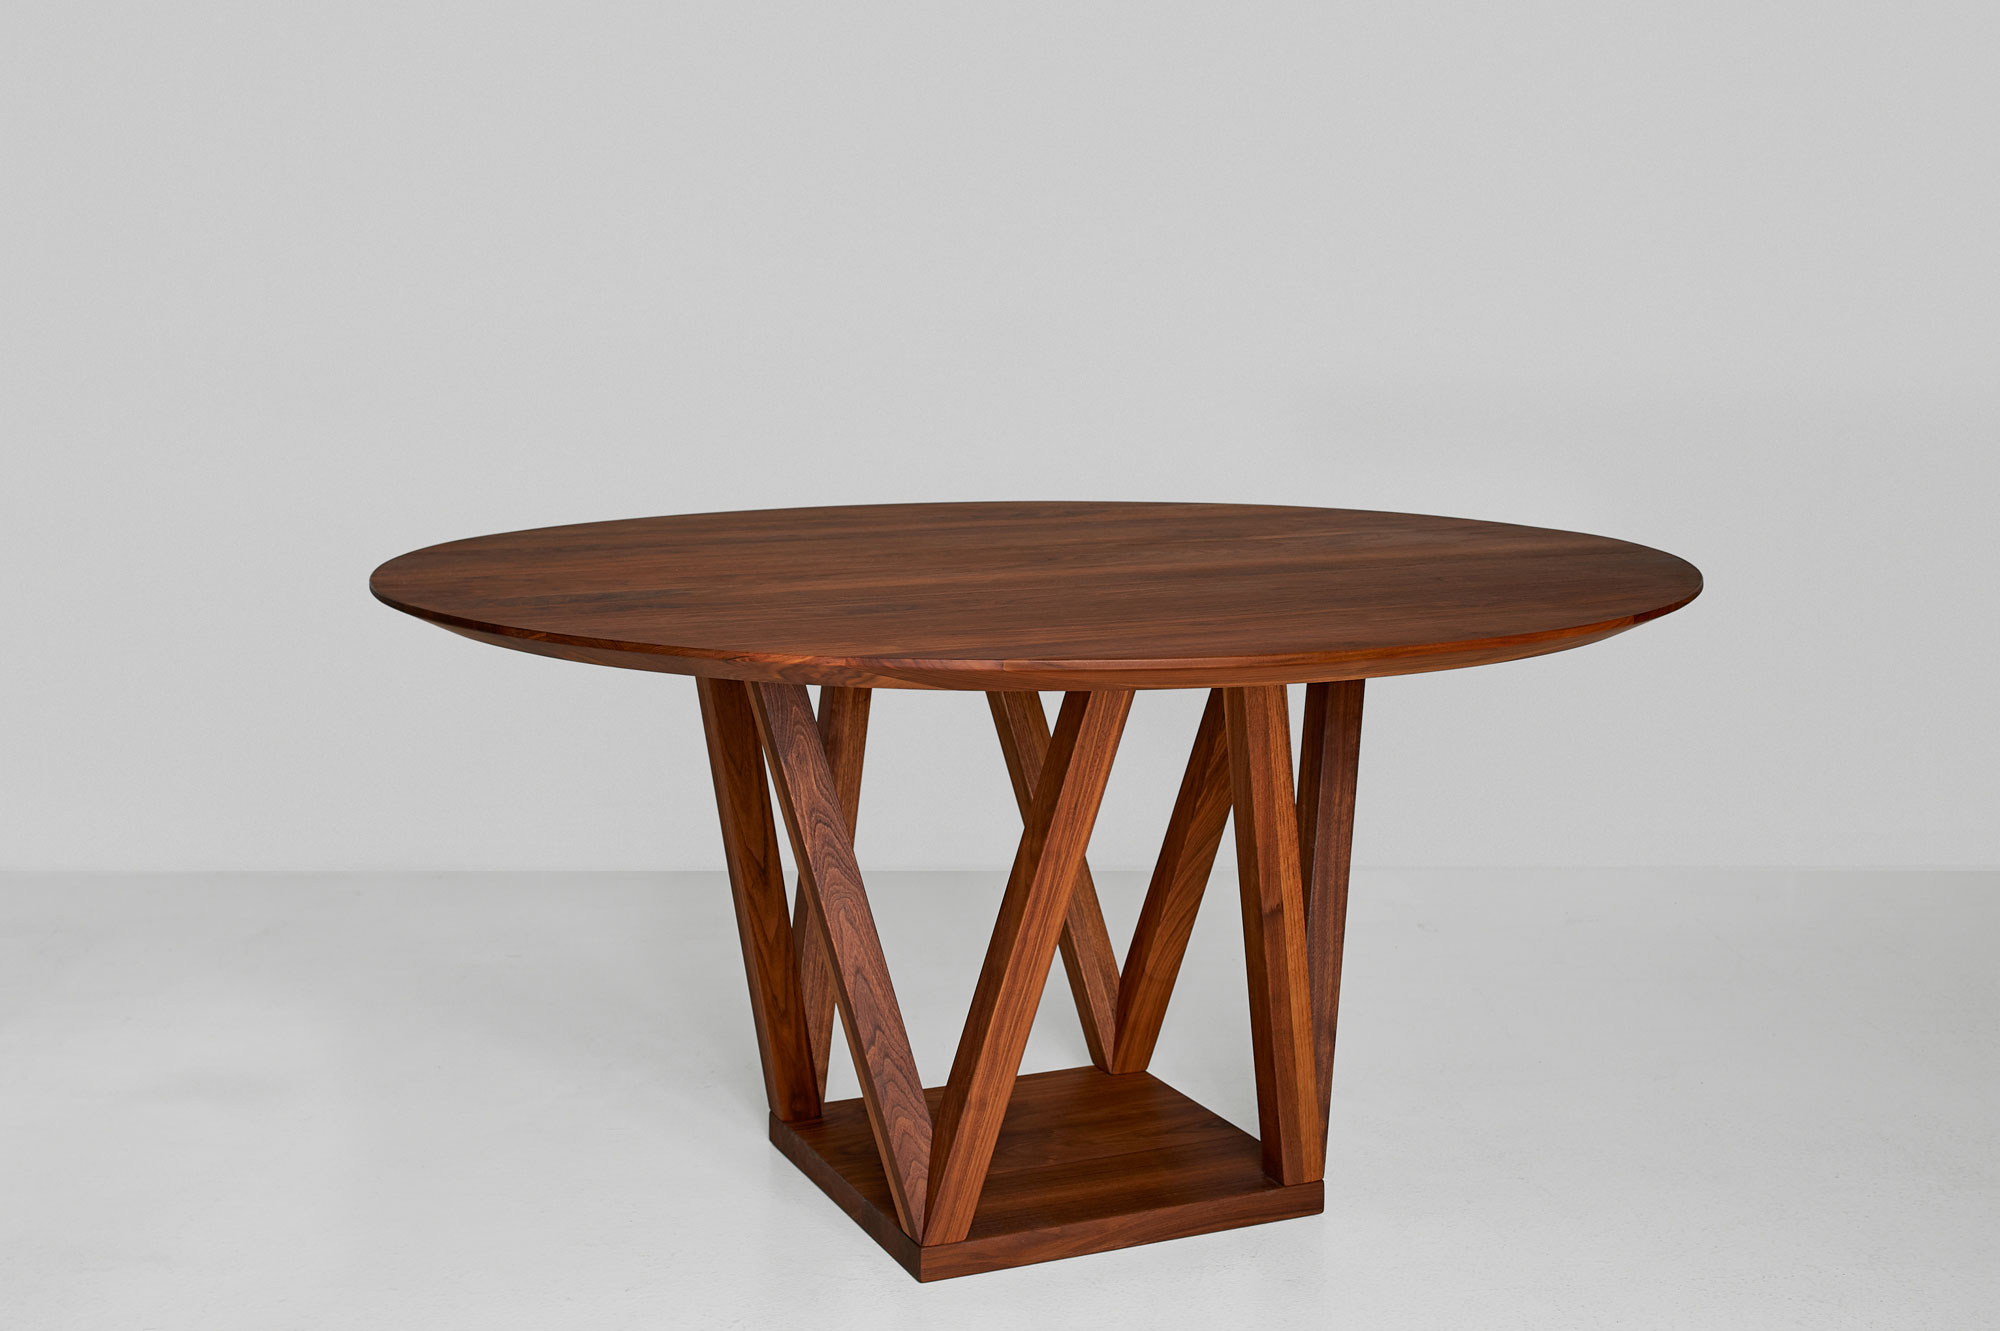 Round Designer Table CREO 0993 custom made in solid wood by vitamin design